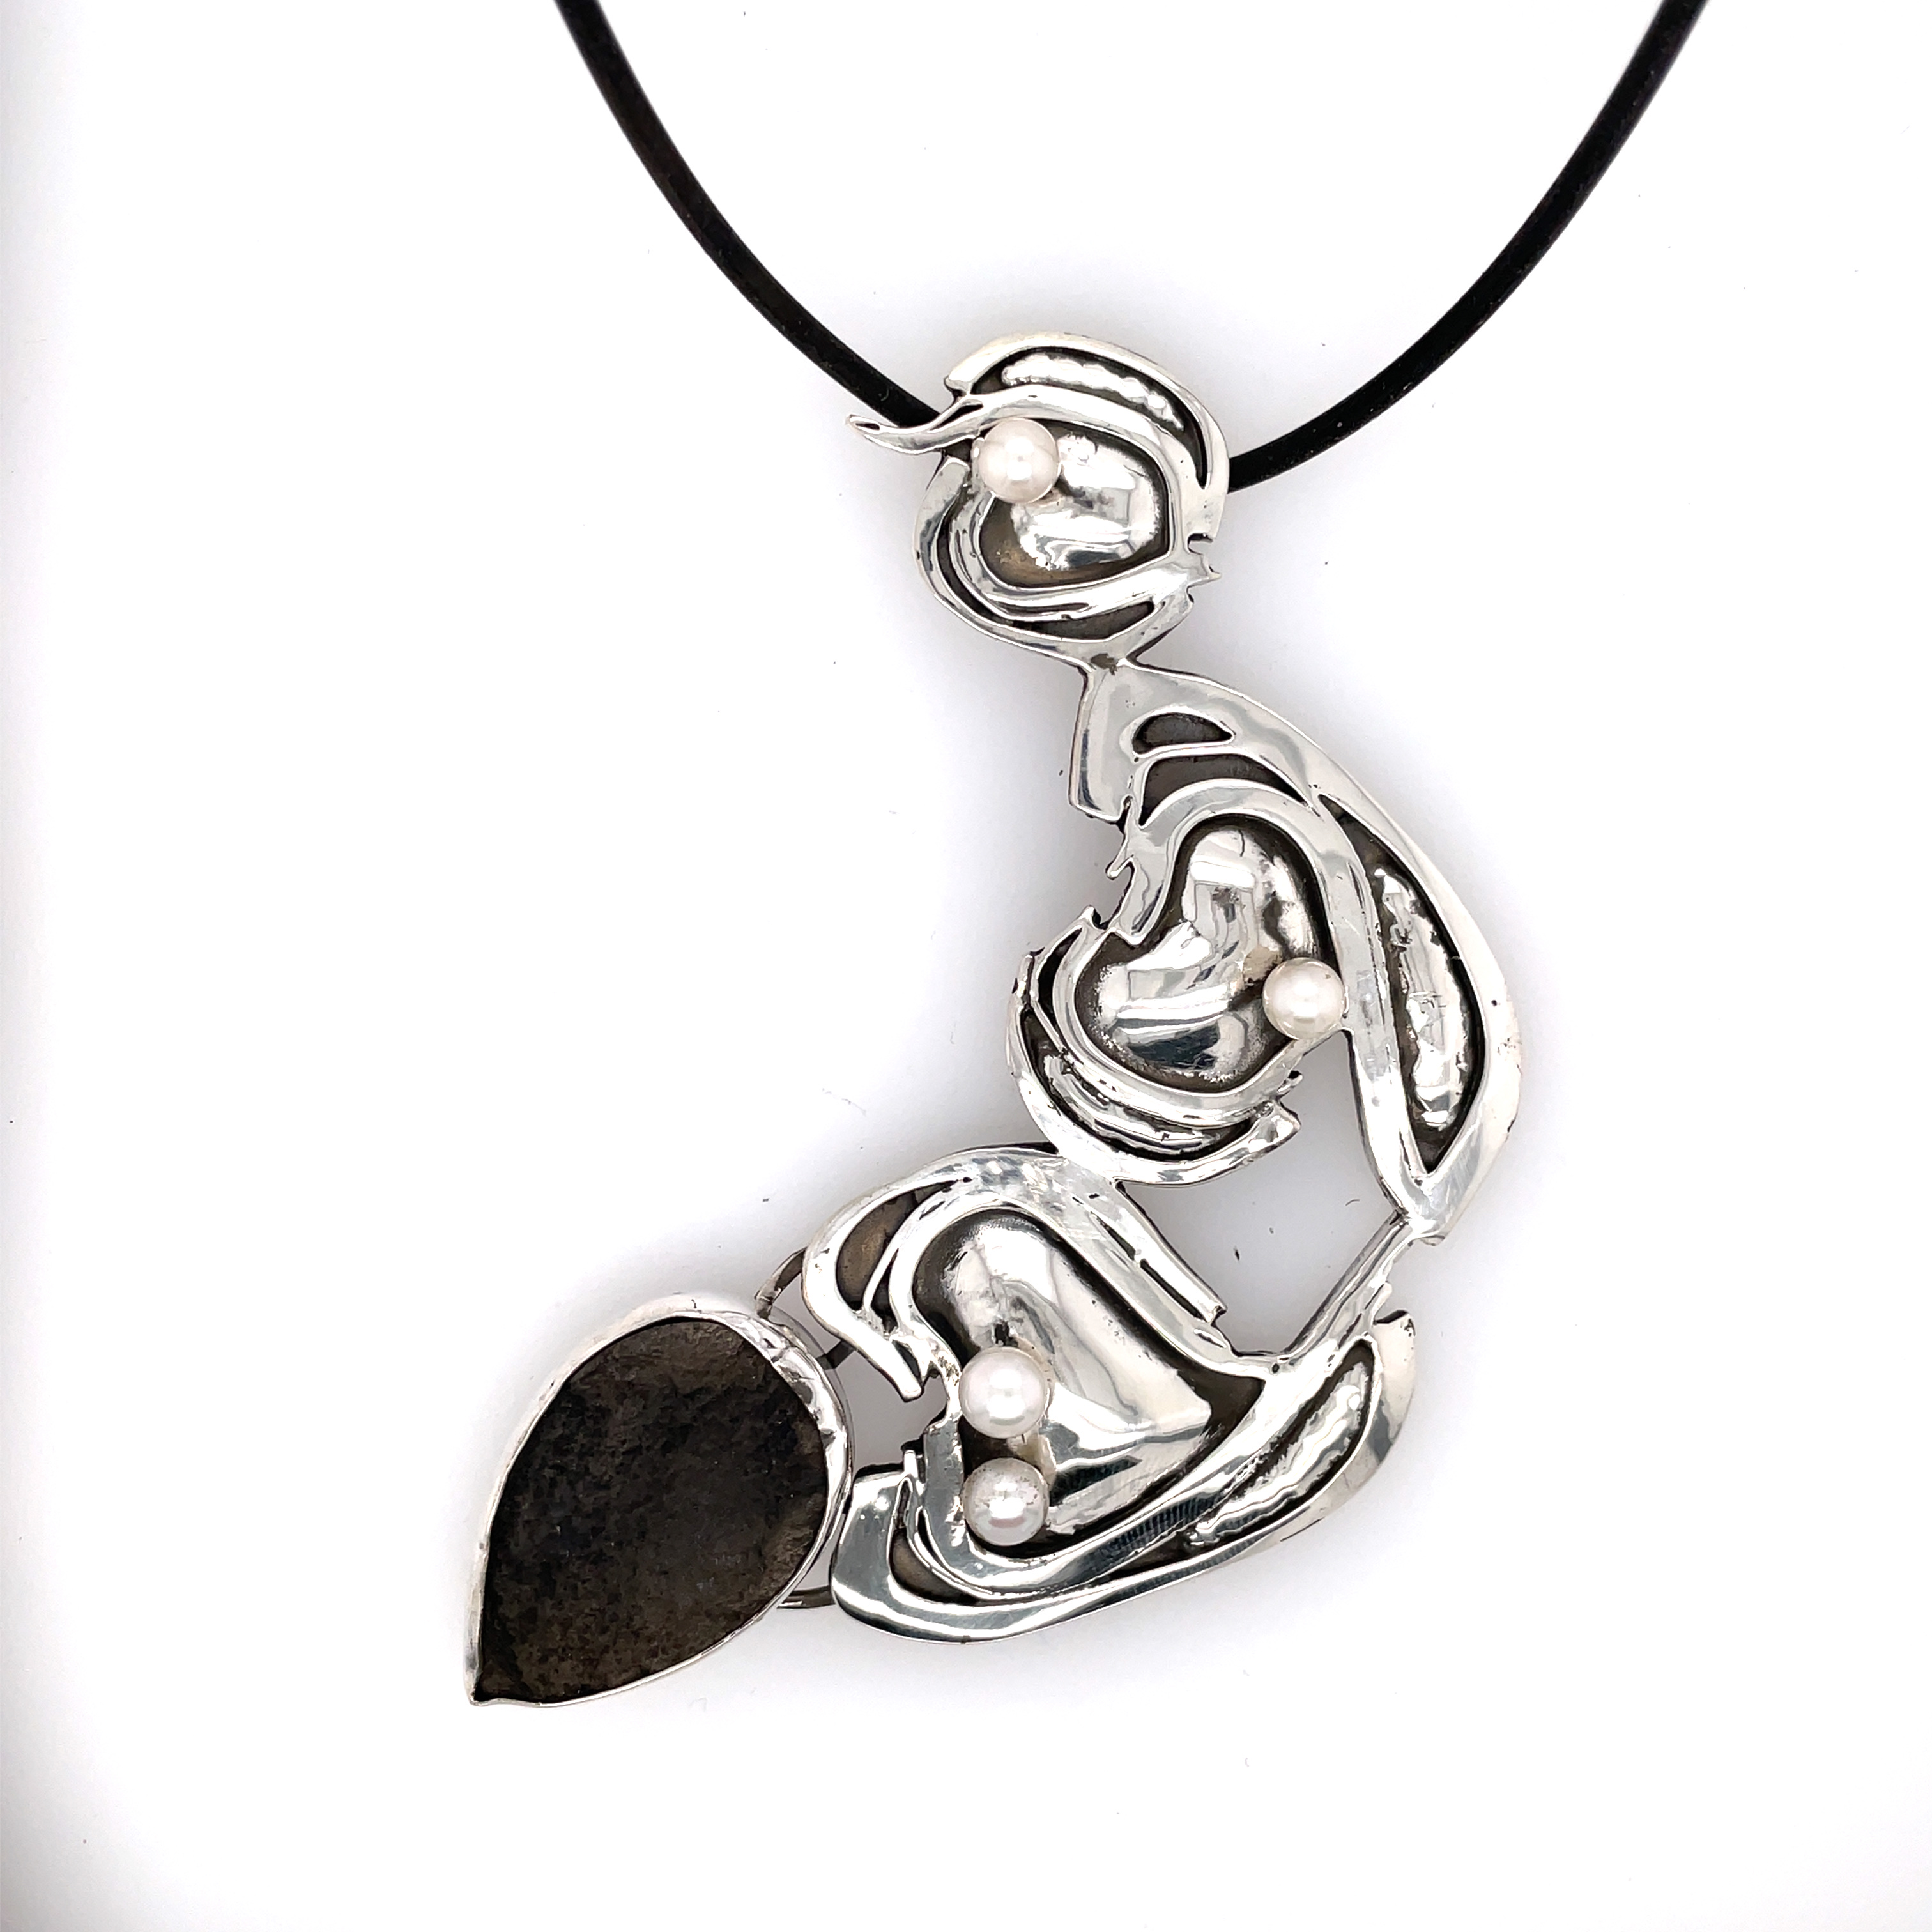 Heart Pendant - Silver, Pearls and Black Jade